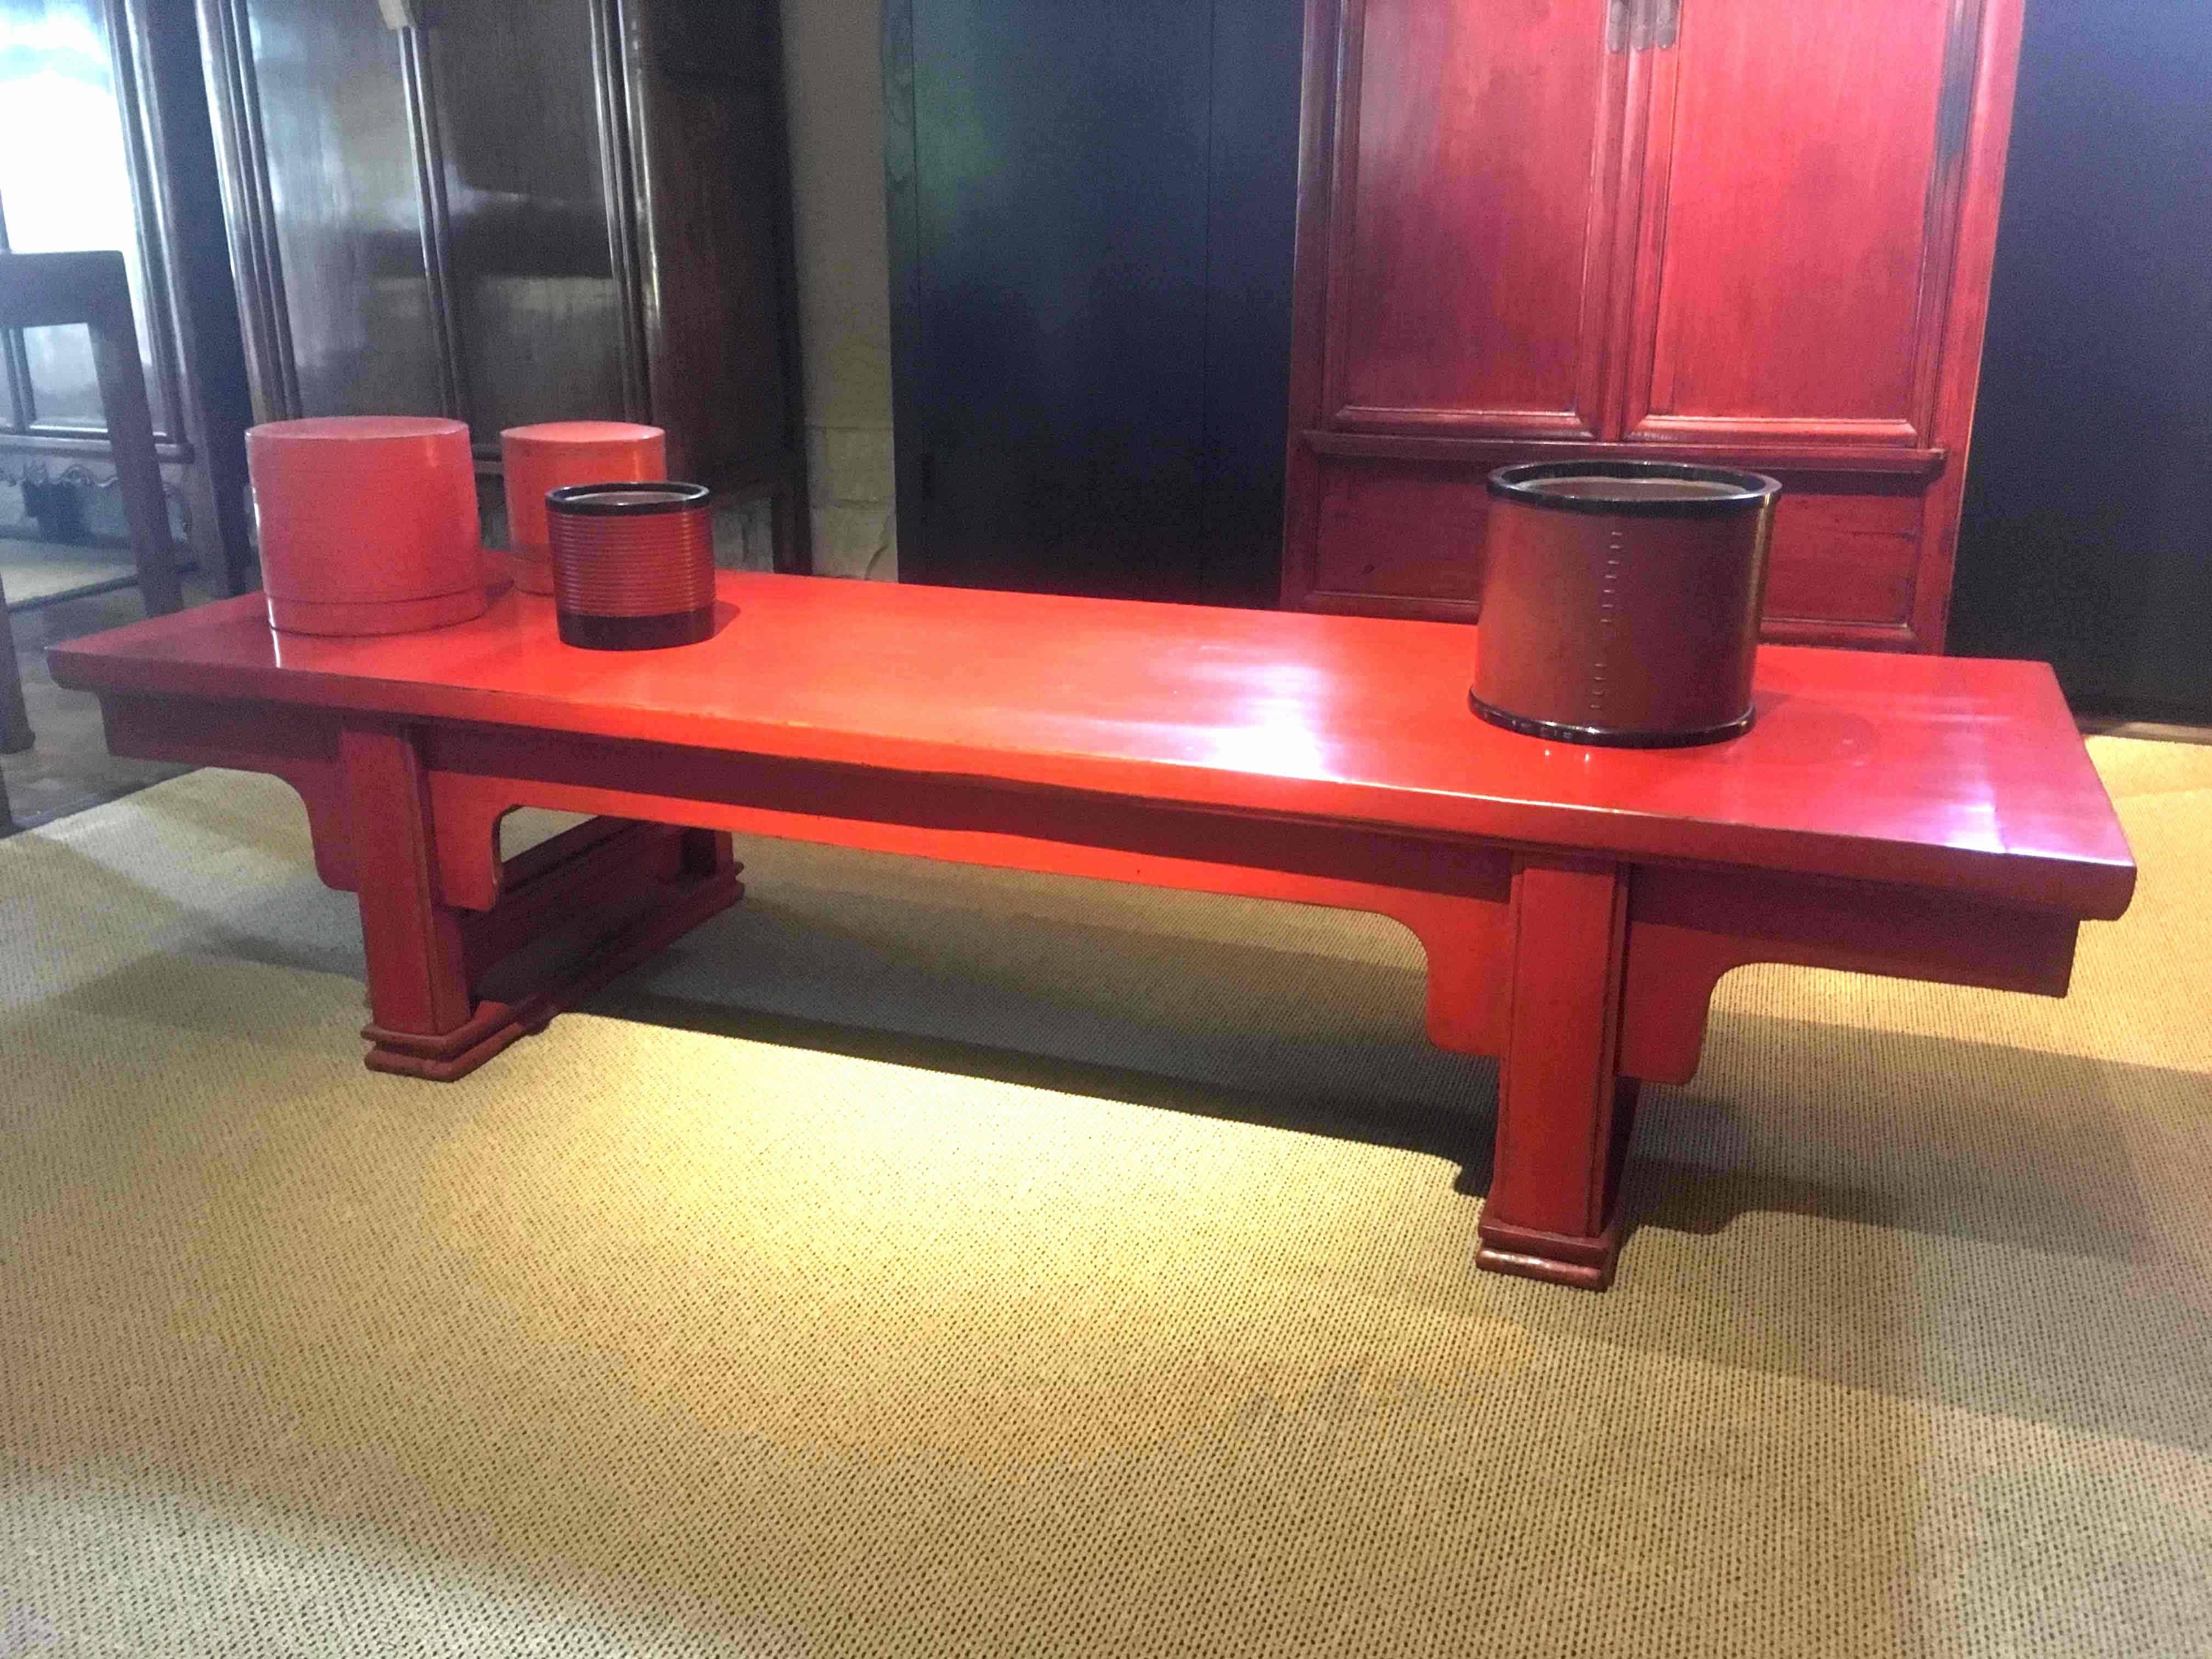 This elegant recessed-leg painting table was used as a working table for artists/scholars to paint scrolls and write calligraphy. As a rule, the table did not have drawers and the scholar would sit next to it to paint. The Painting table imitates